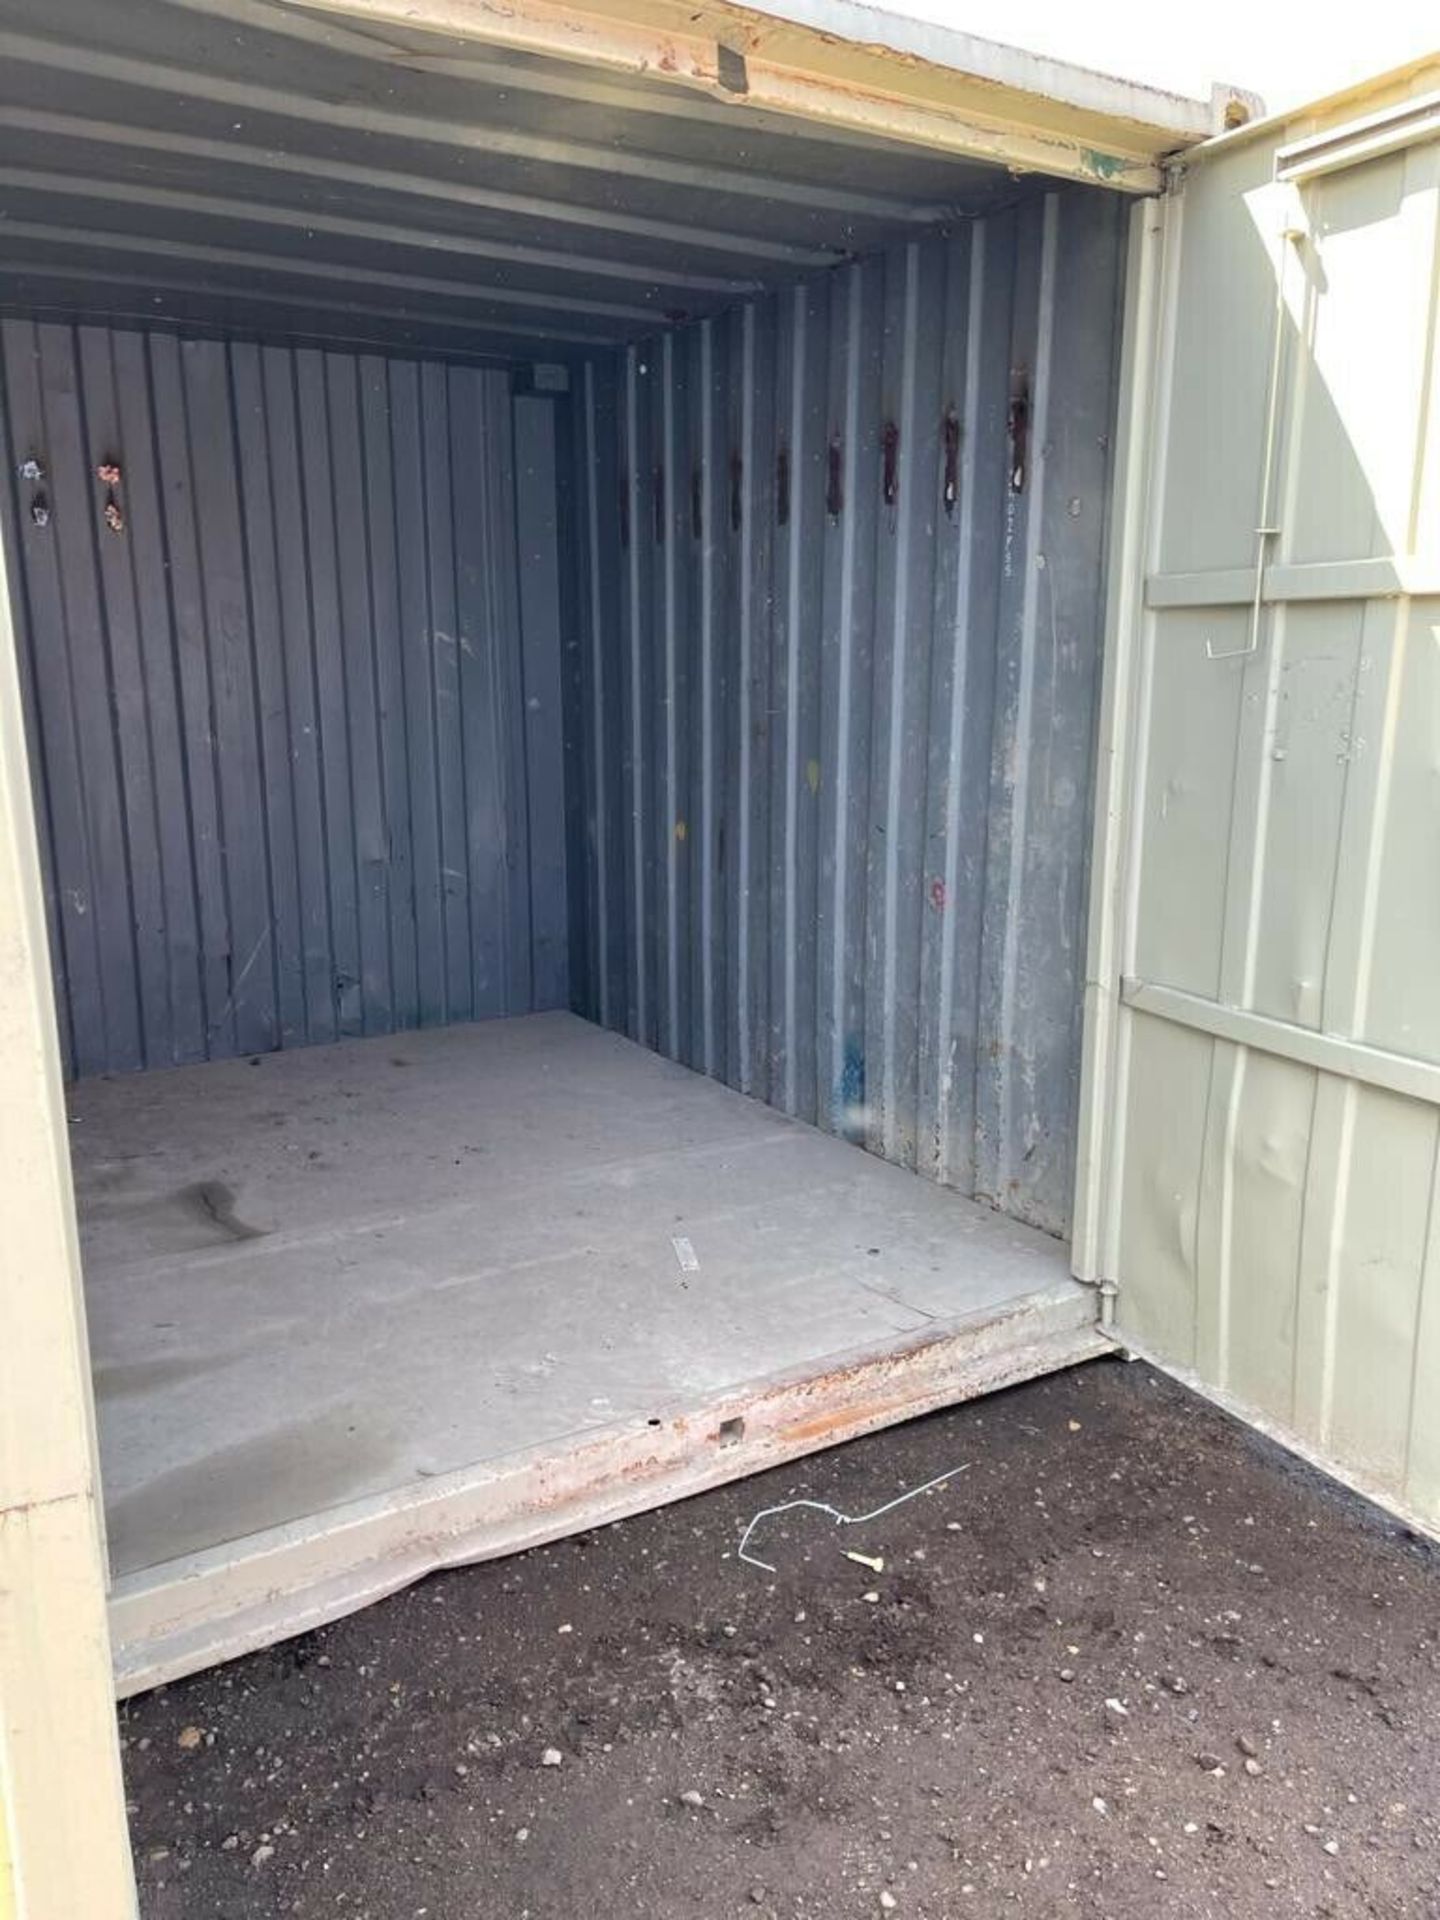 Anti Vandal Steel Storage Container 20ft x 8ft - Image 5 of 5